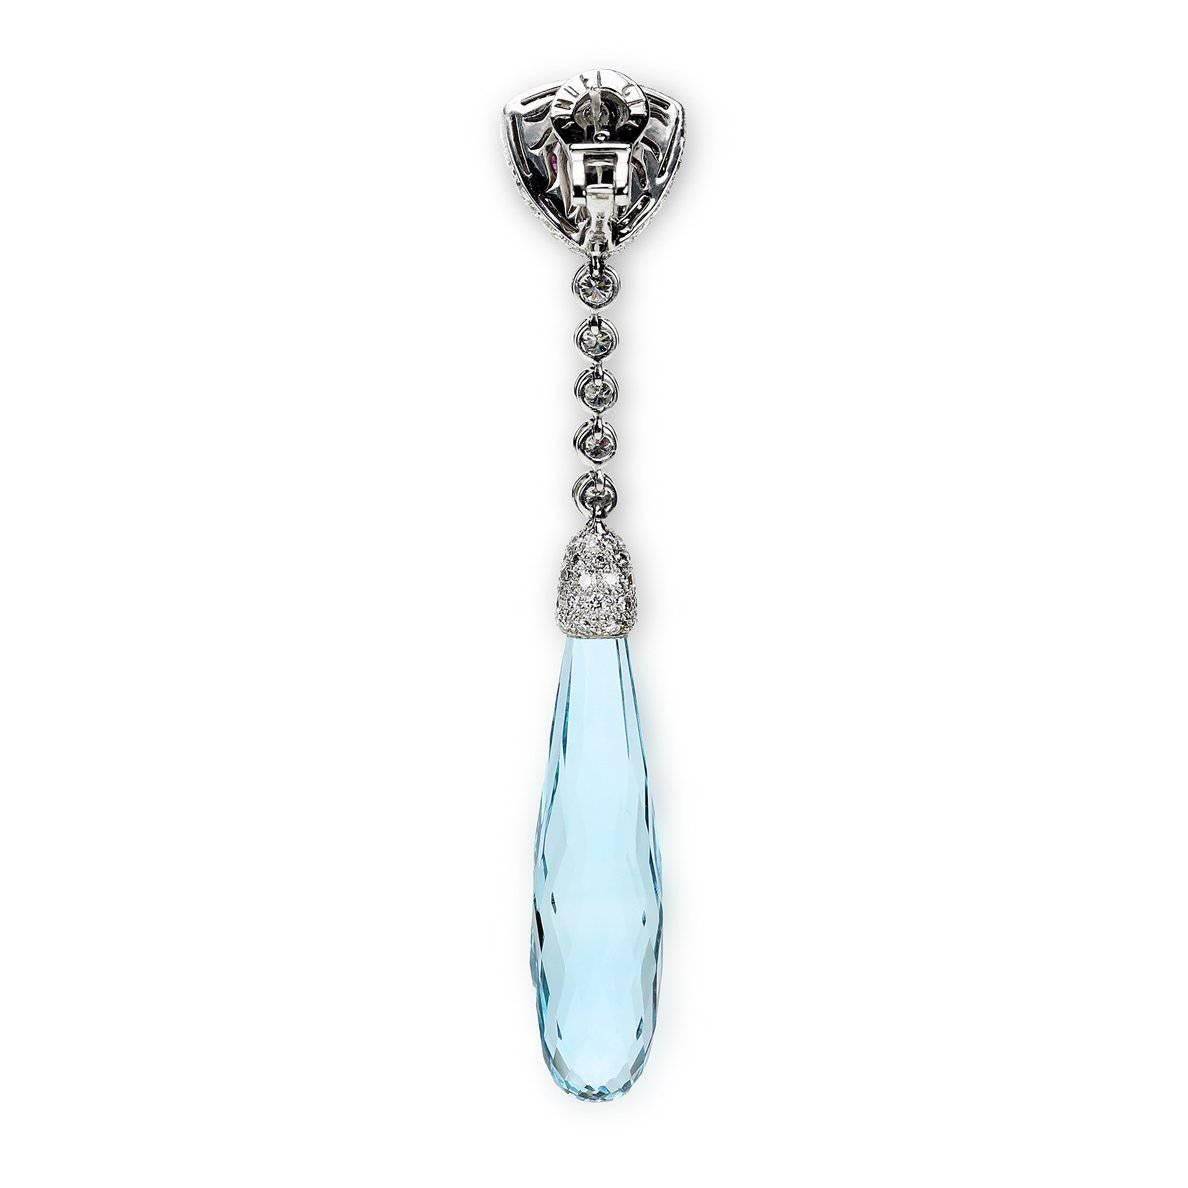 A Pair of "Samuel Getz" 18 Karat White Gold Drop Pendant Earrings Featuring a Pair of Long Briolette Aquamarines weighing 68.88 Carats, [34.56 ct., 43.73 x 11.43 x 11.29 mm., 34.32 ct., 45.16 x 11.16 x 10.90 mm.], a Pair of Very Fine